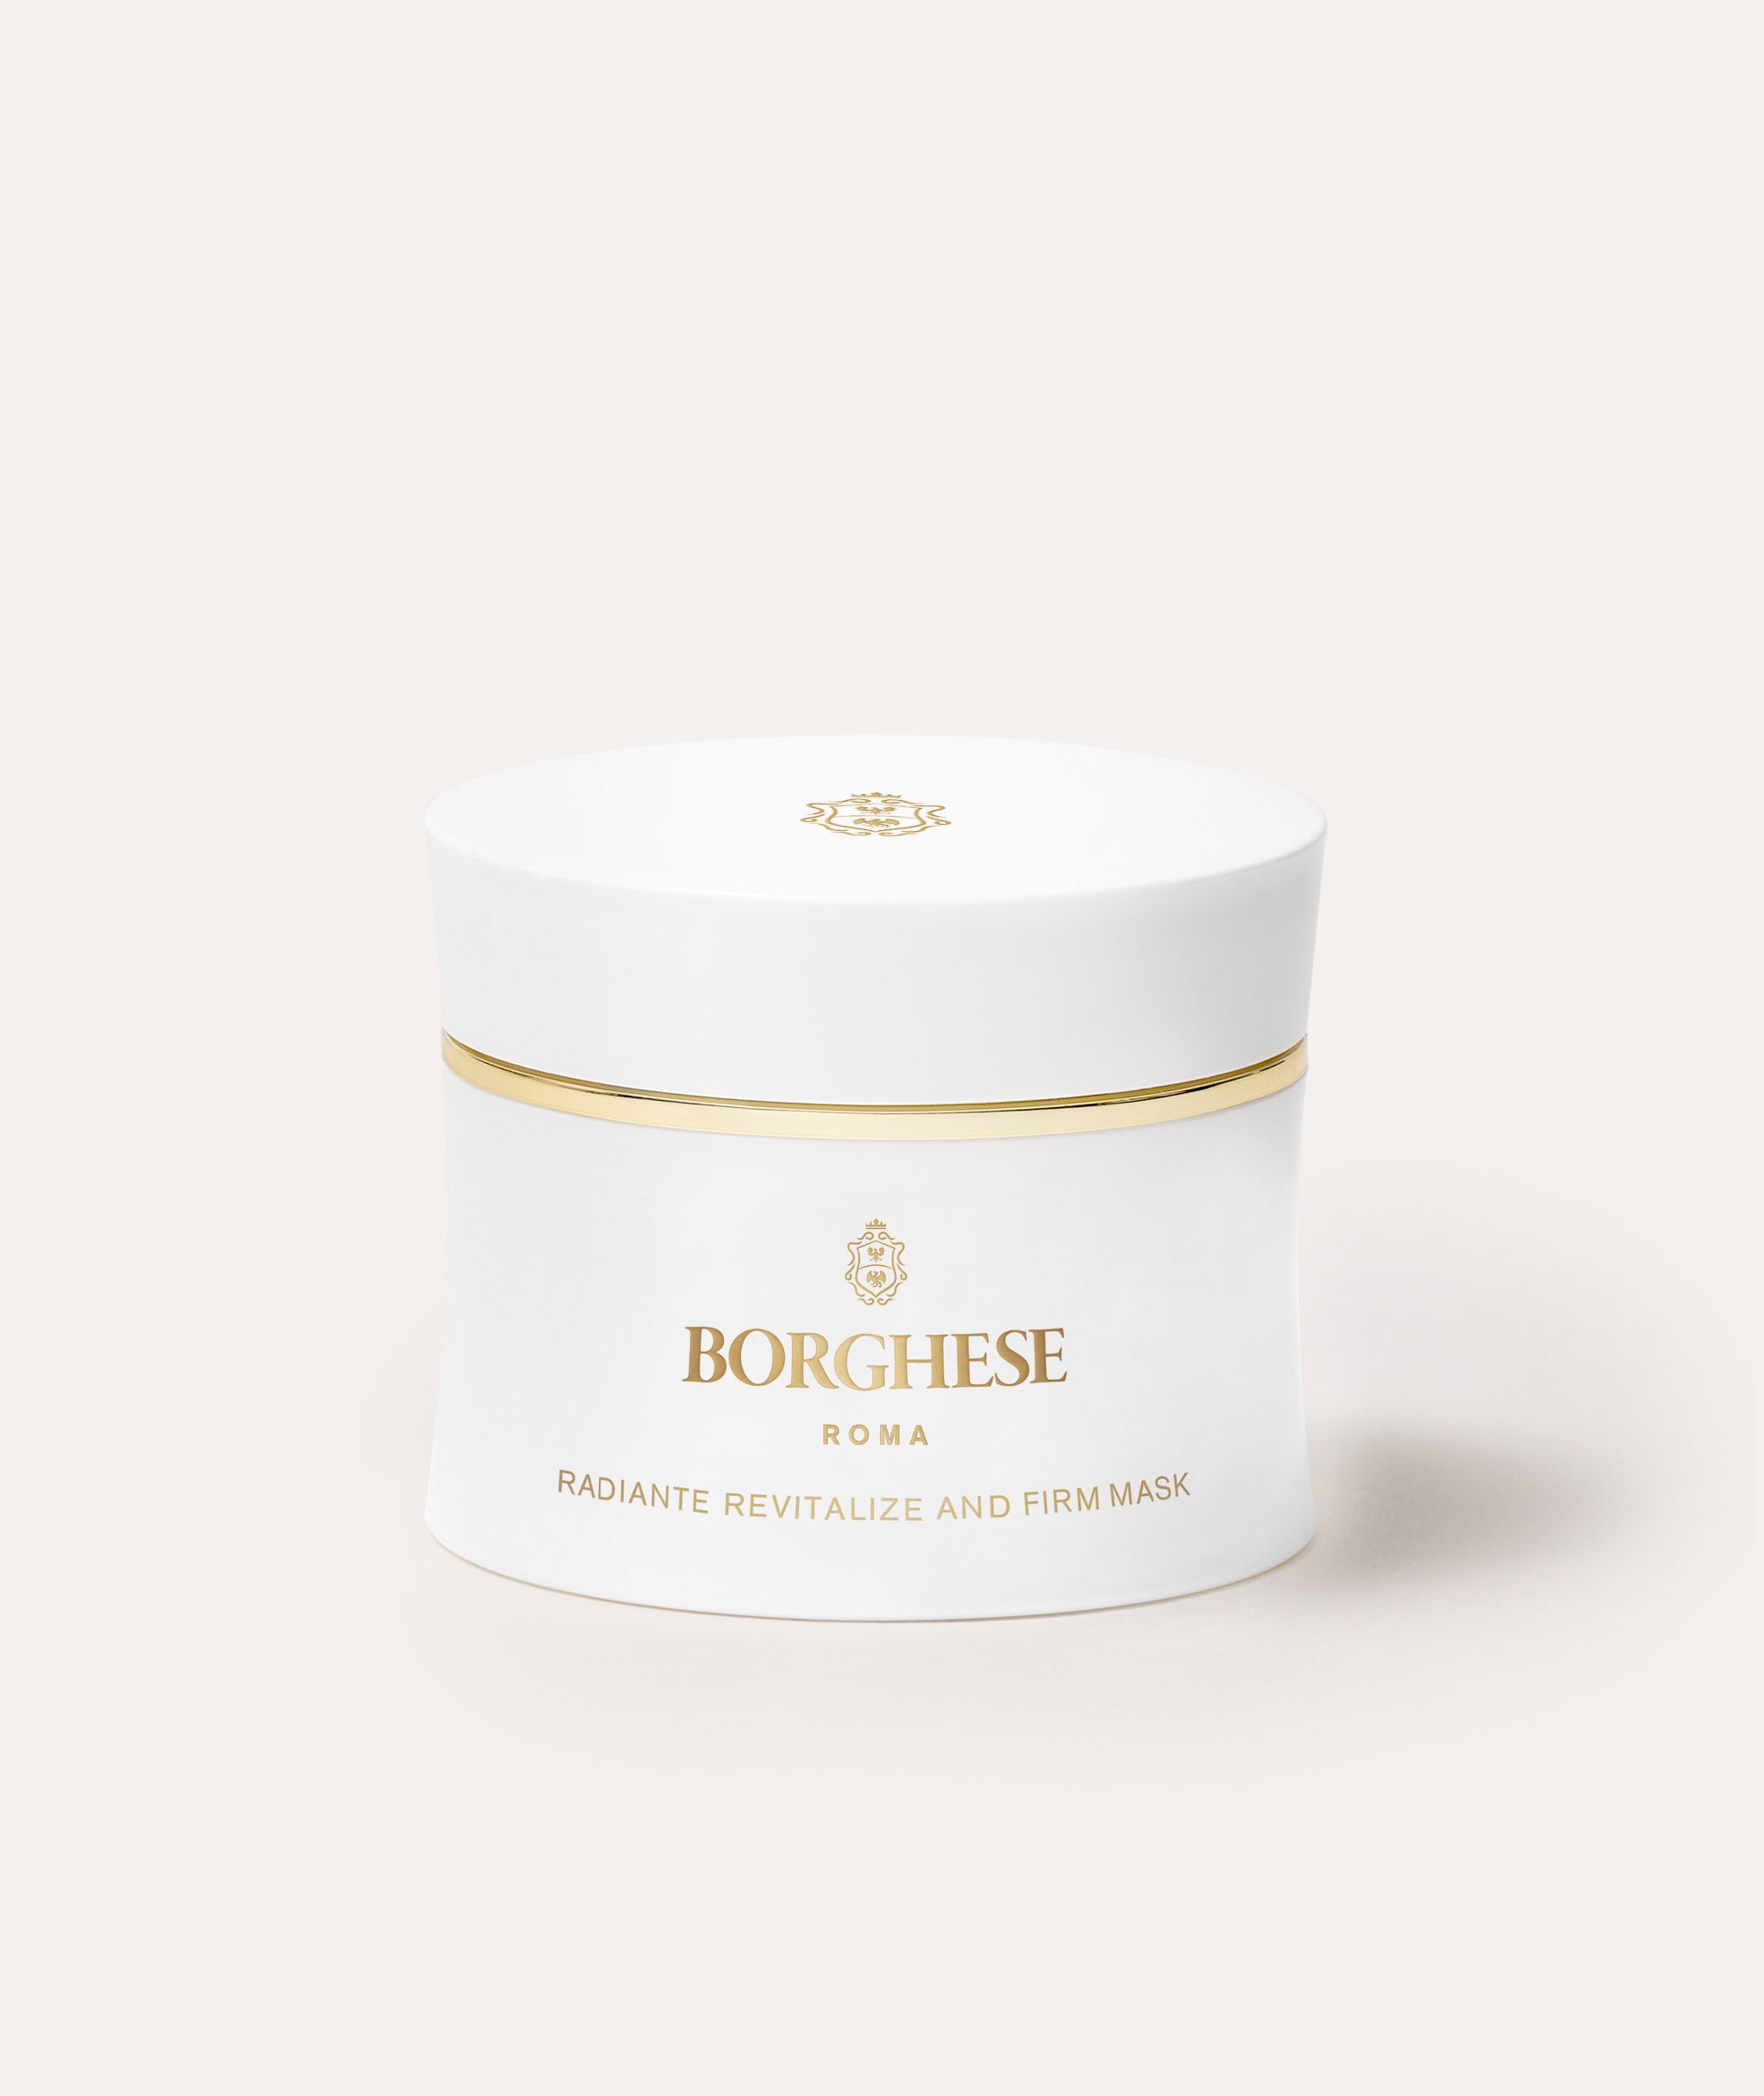 This is a picture of the Borghese Radiante Revitalize and Firm Mask in a white jar